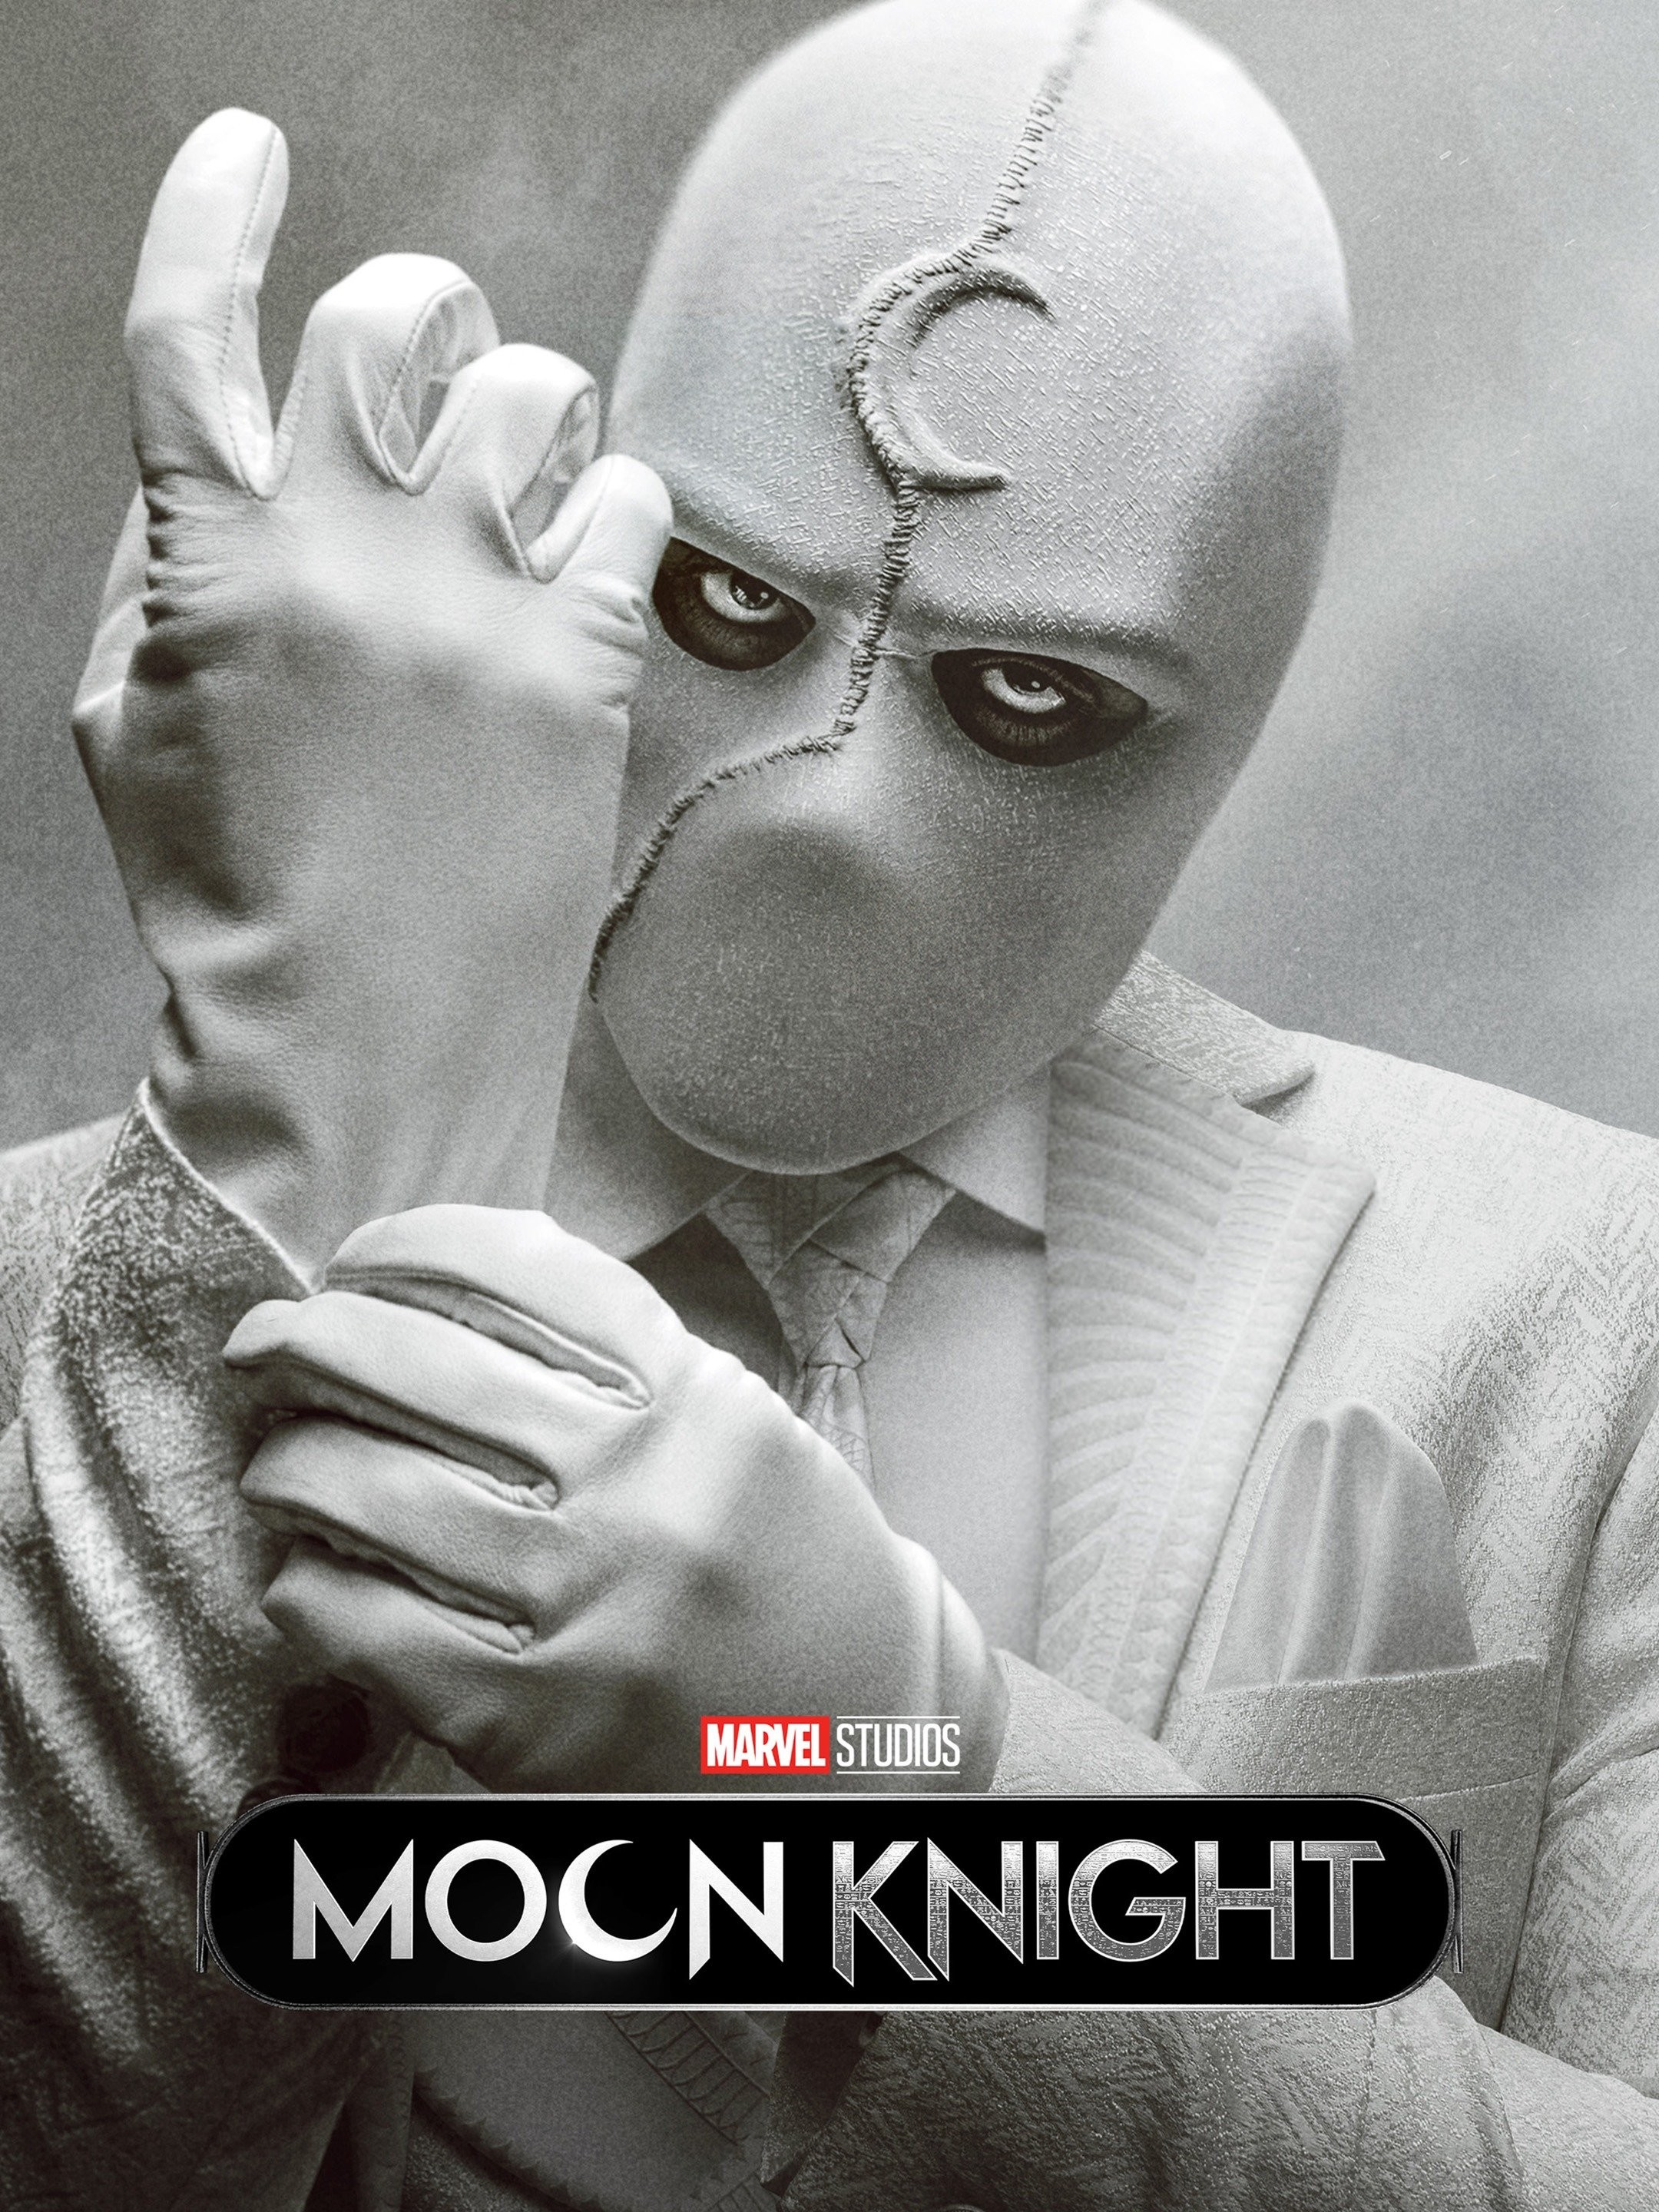 Rotten Tomatoes - Moon Knight is Certified Fresh at 88% on